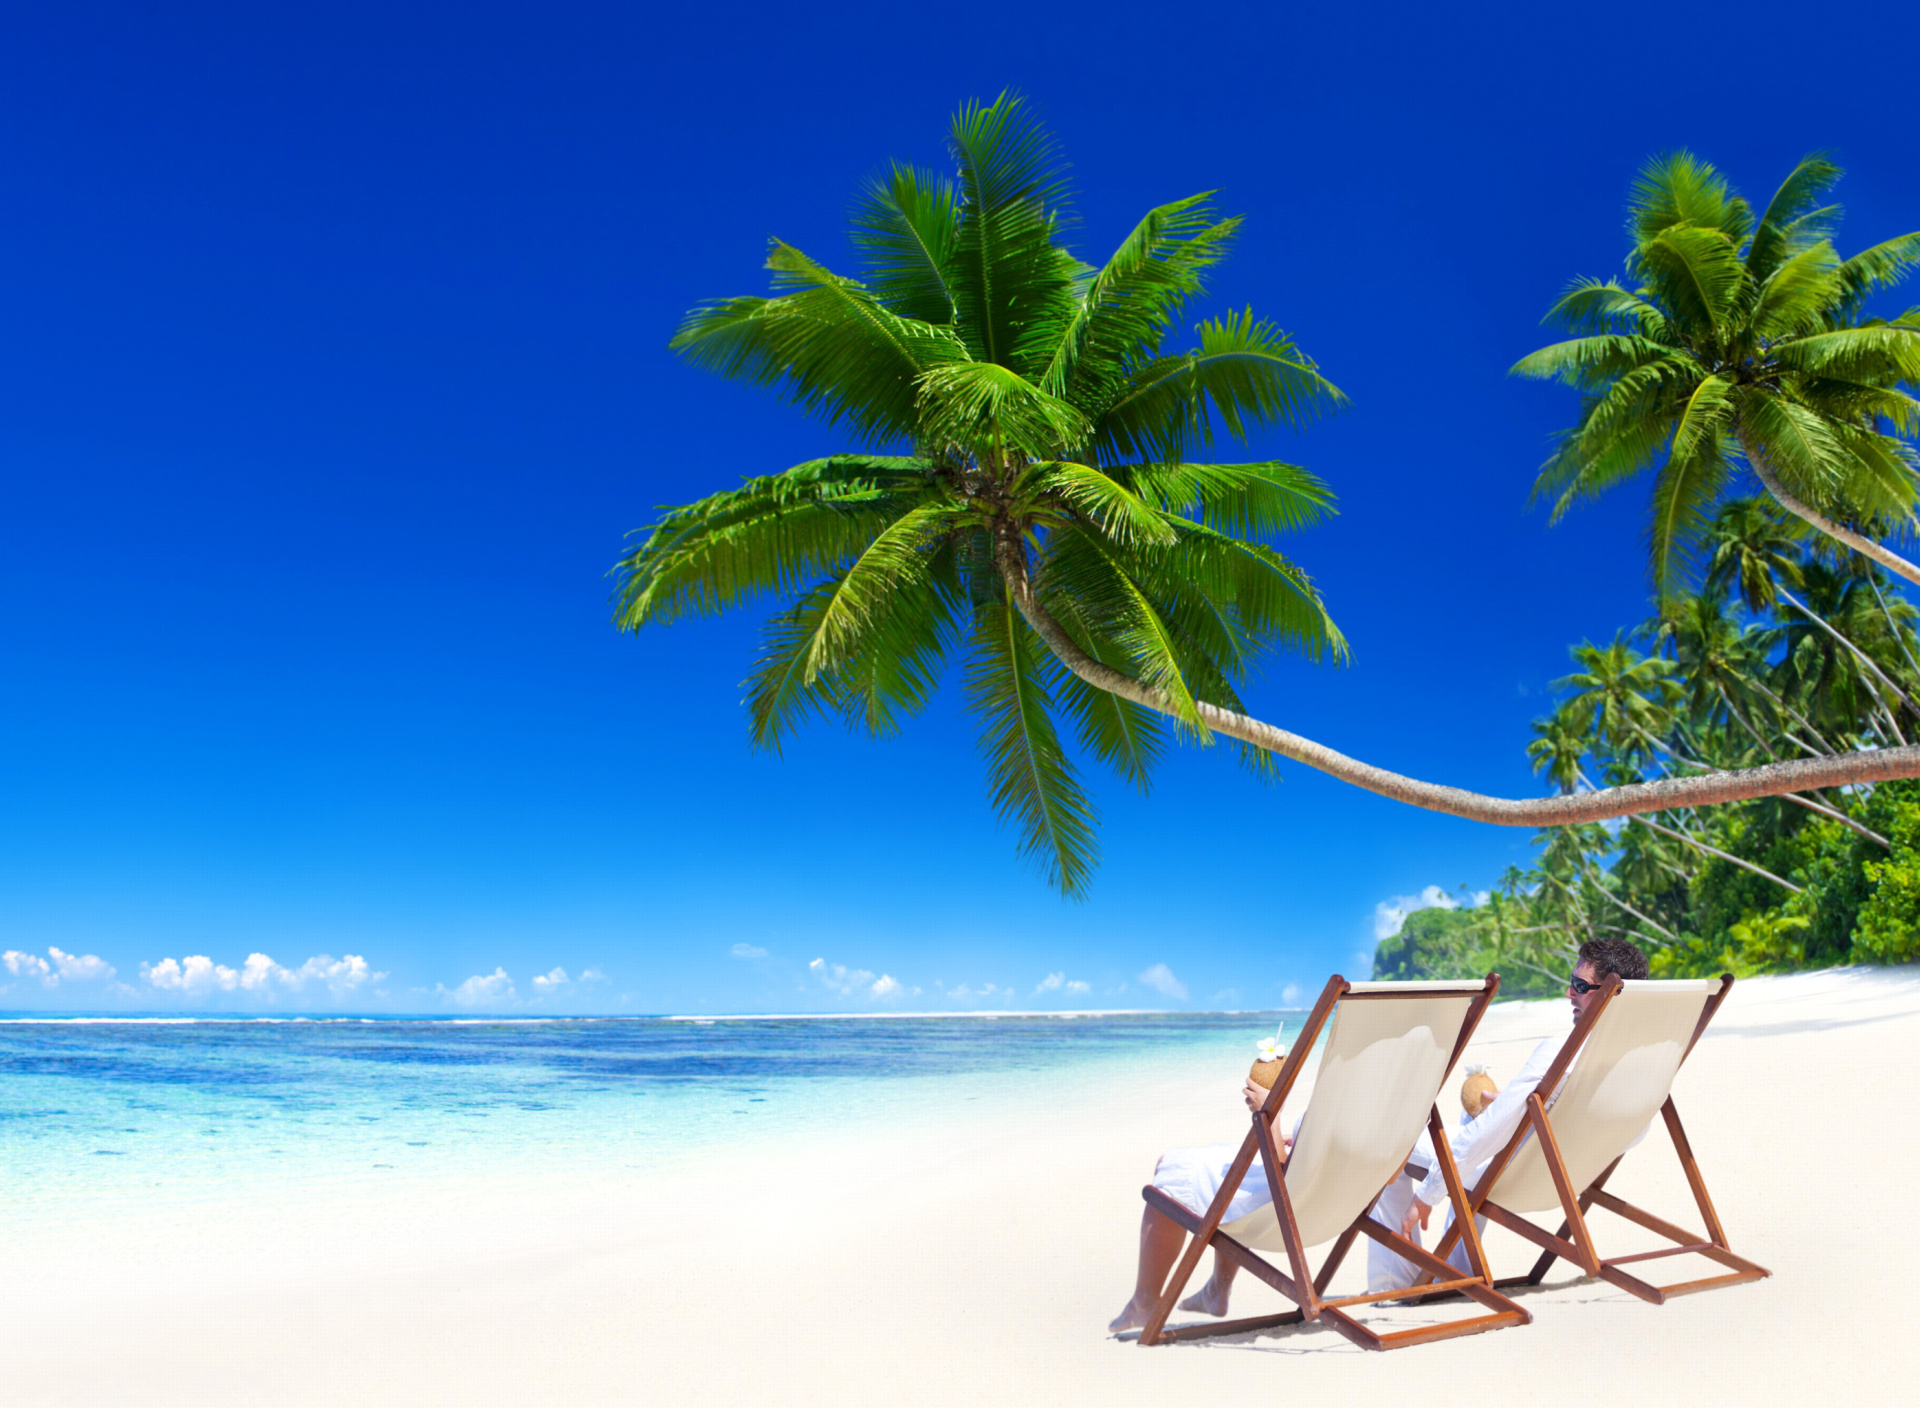 Vacation in Tropical Paradise wallpaper 1920x1408